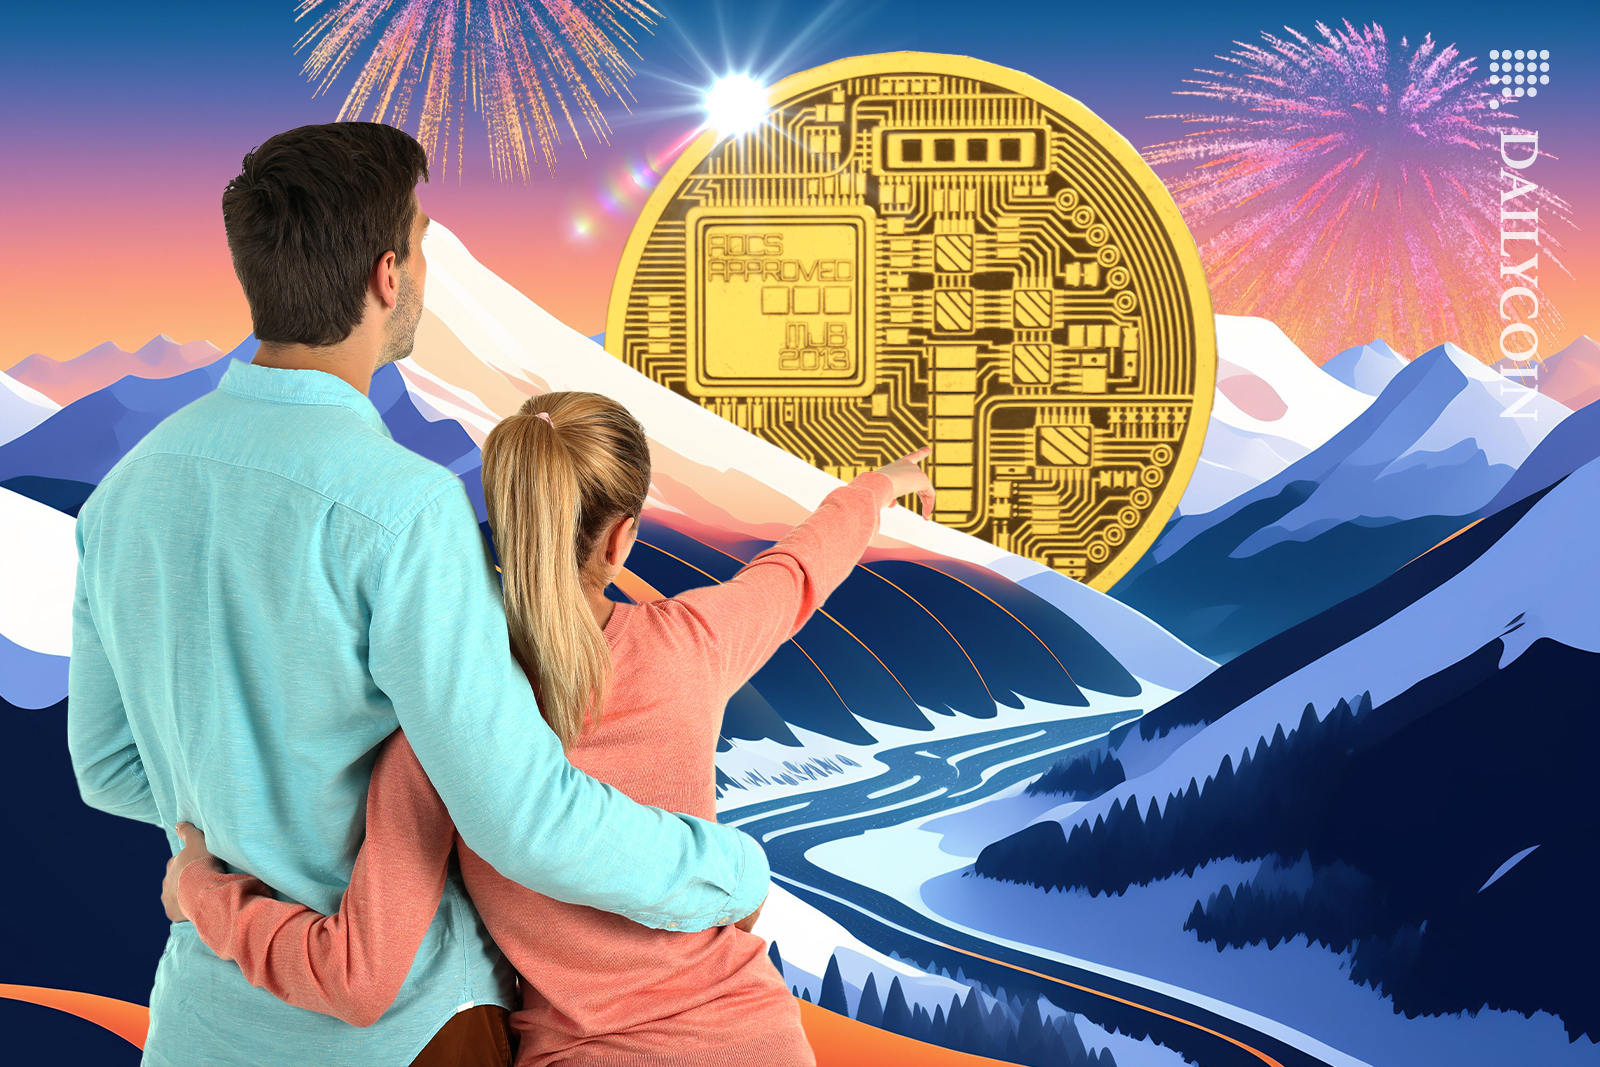 A couple in the snowy mountains, seeing a coin with fireworks.